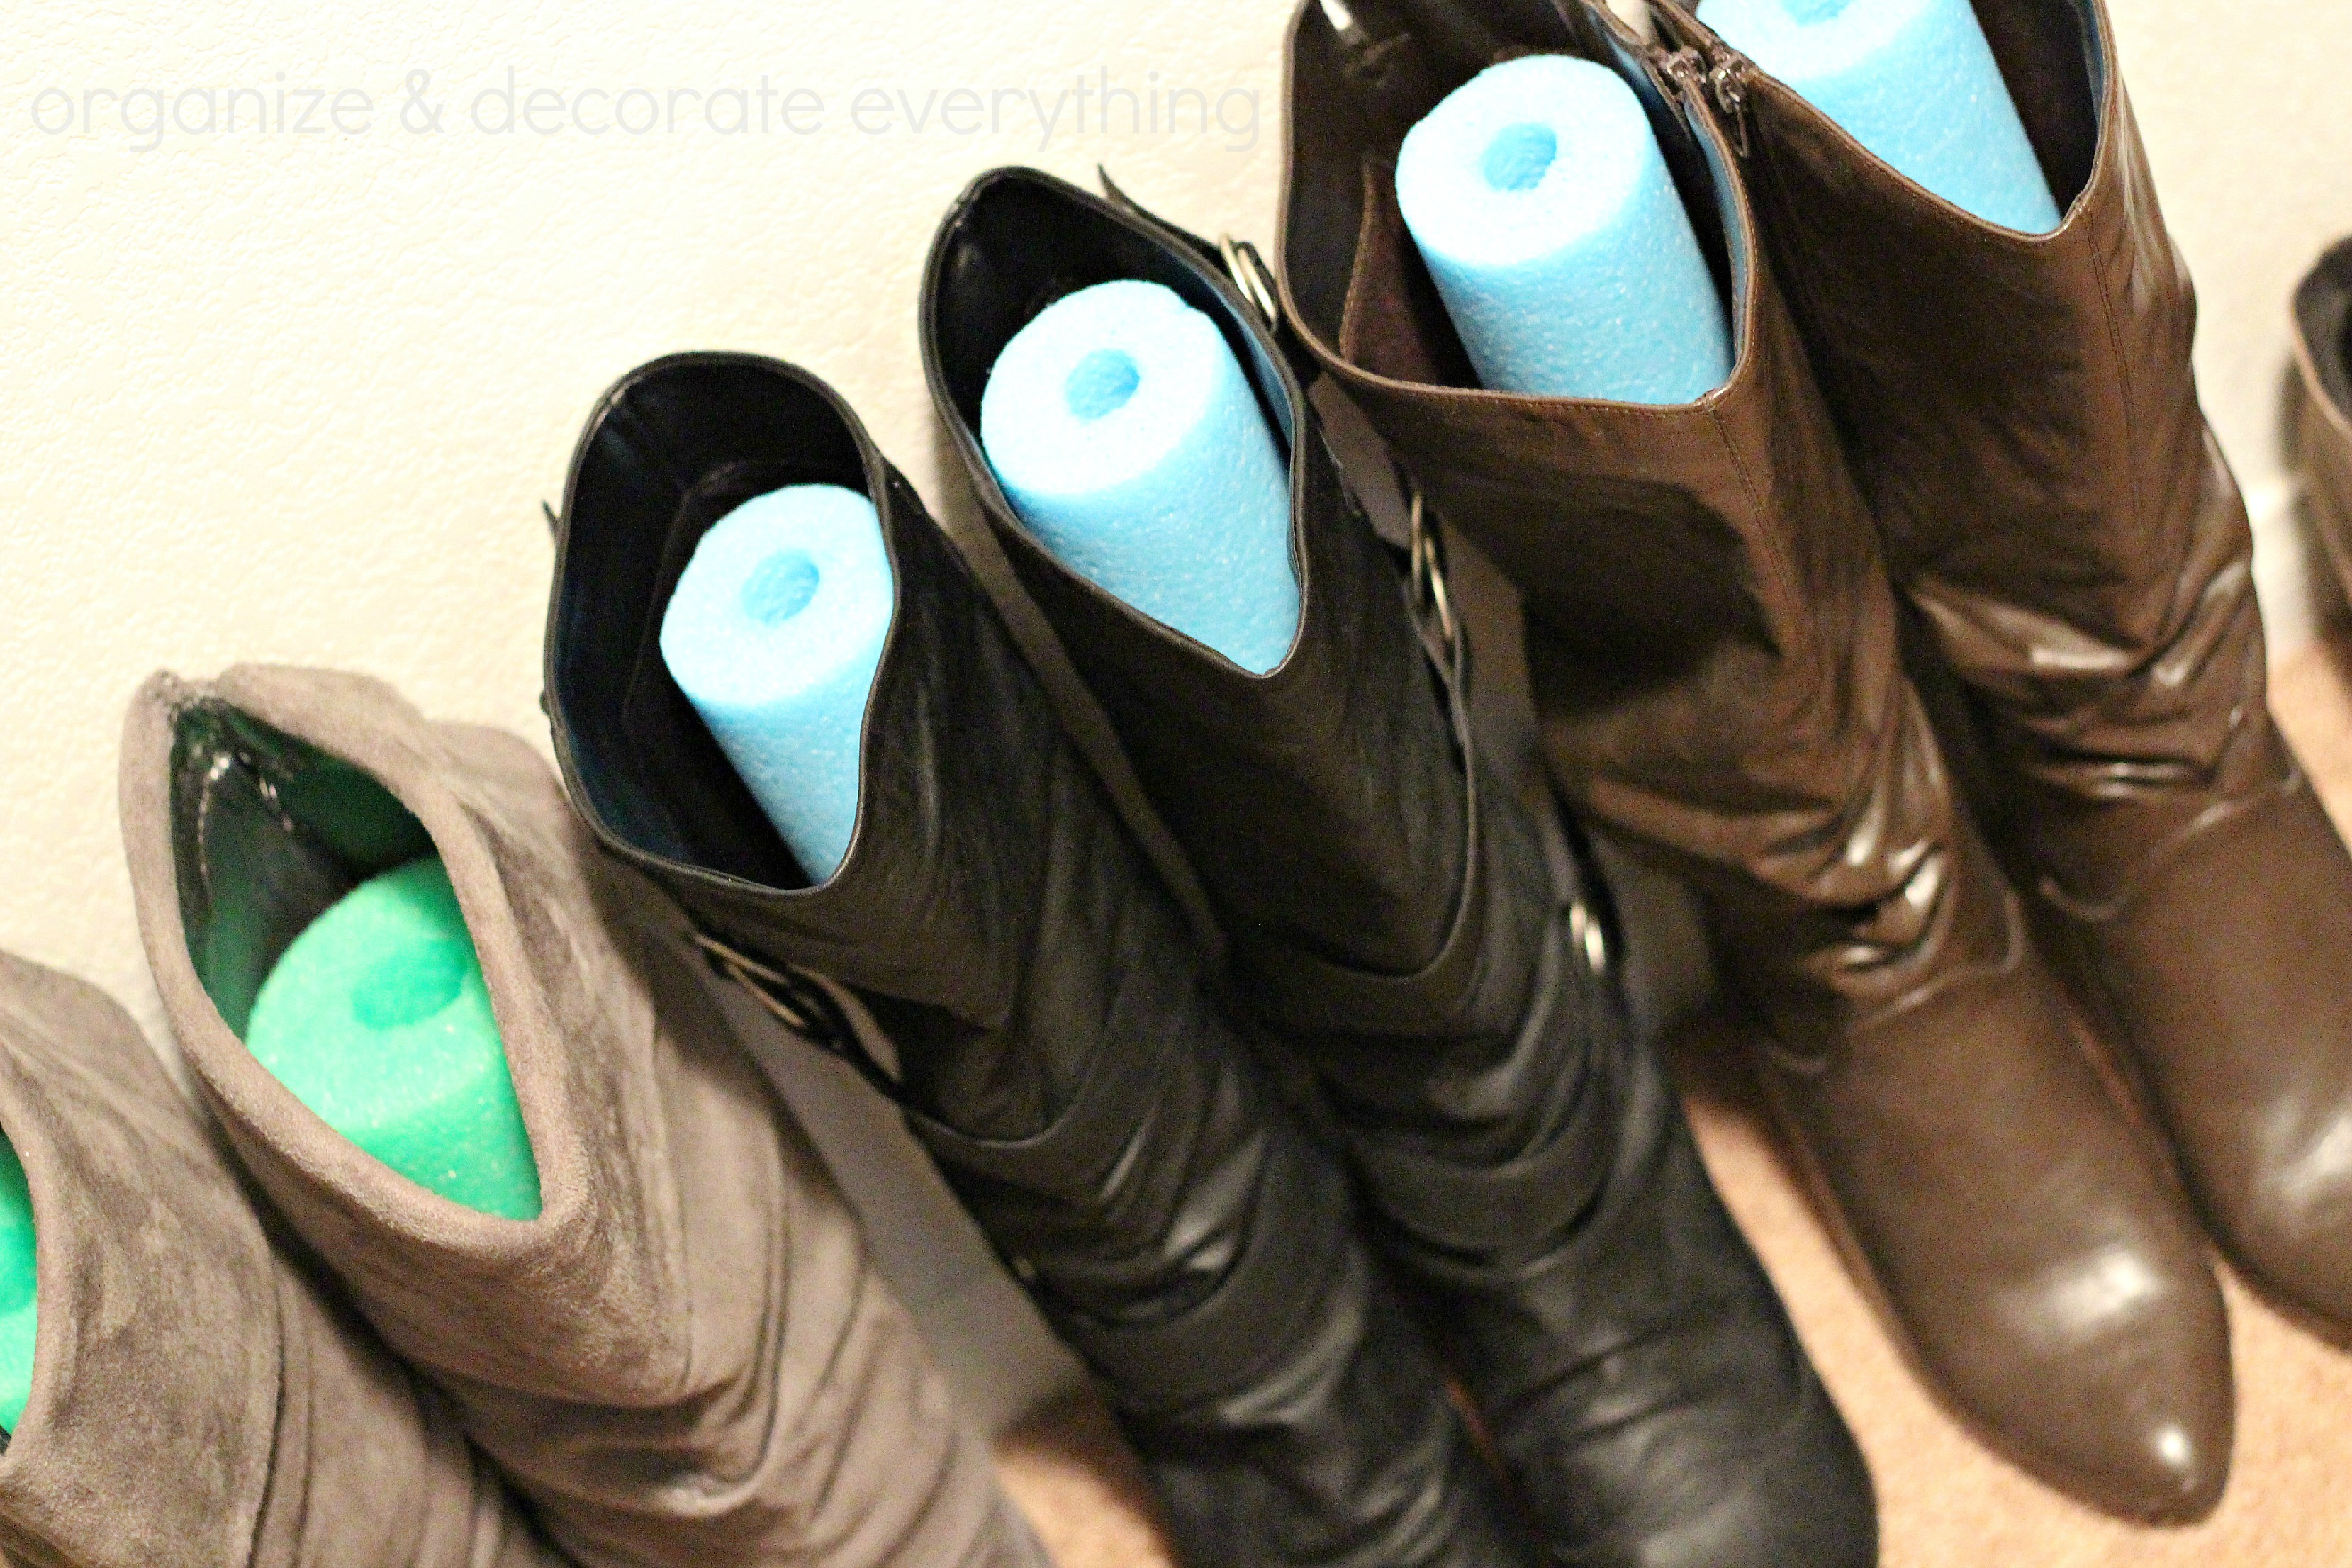 DIY Boot Shapers - Organize and Decorate Everything